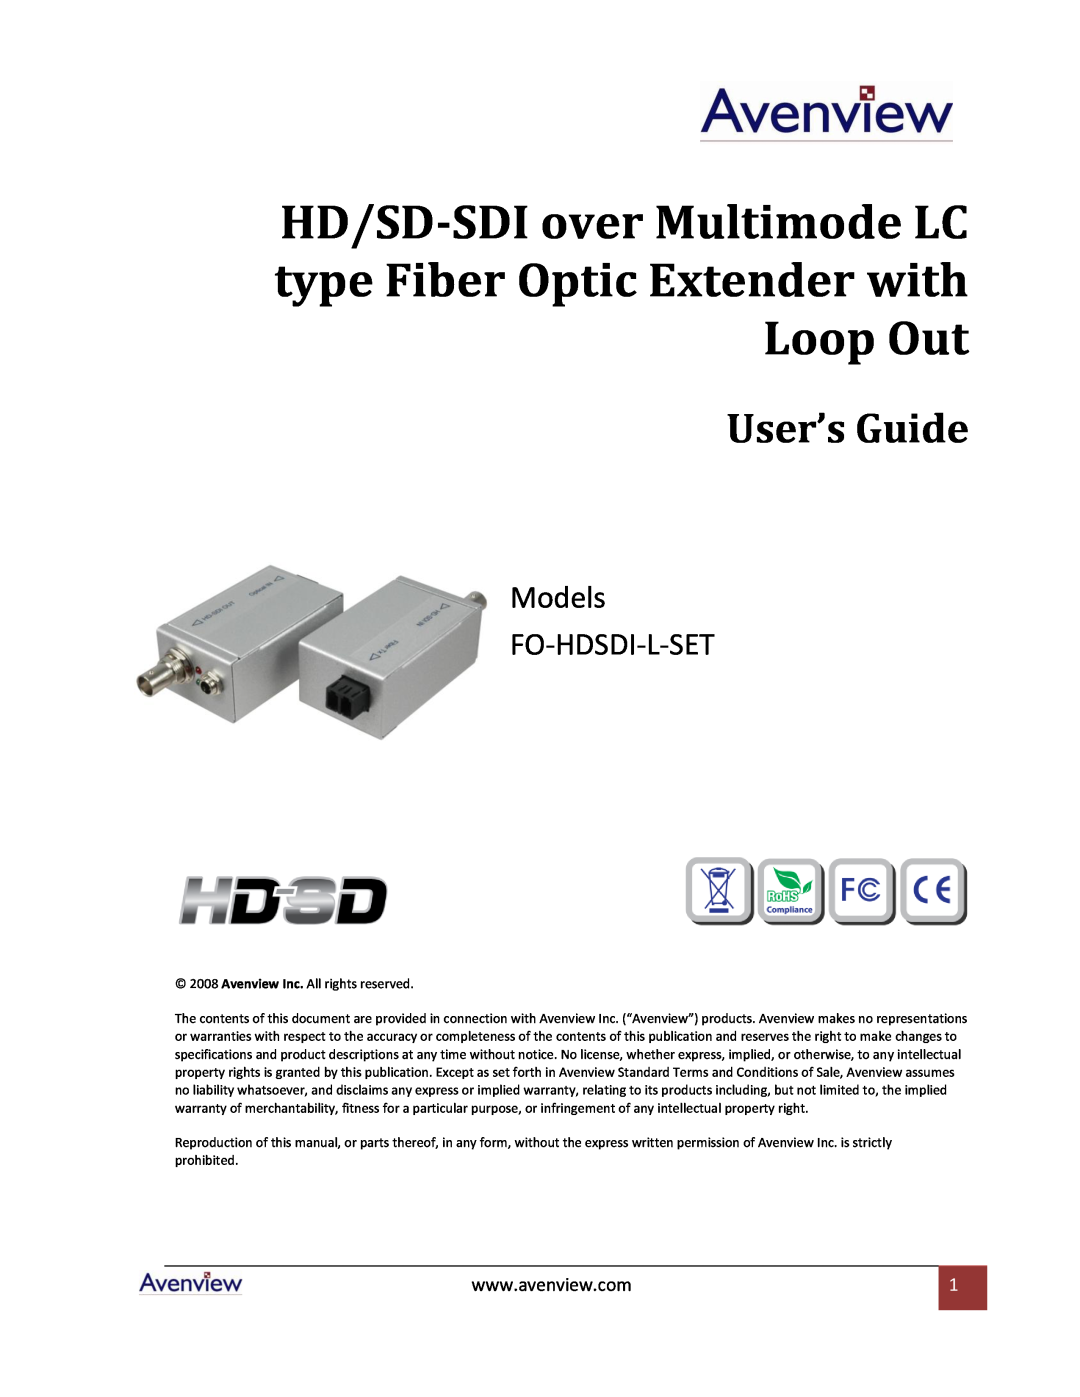 Avenview FO-HDSDI-L-SET specifications HD/SD-SDI over Multimode LC type Fiber Optic Extender with Loop Out, User’s Guide 